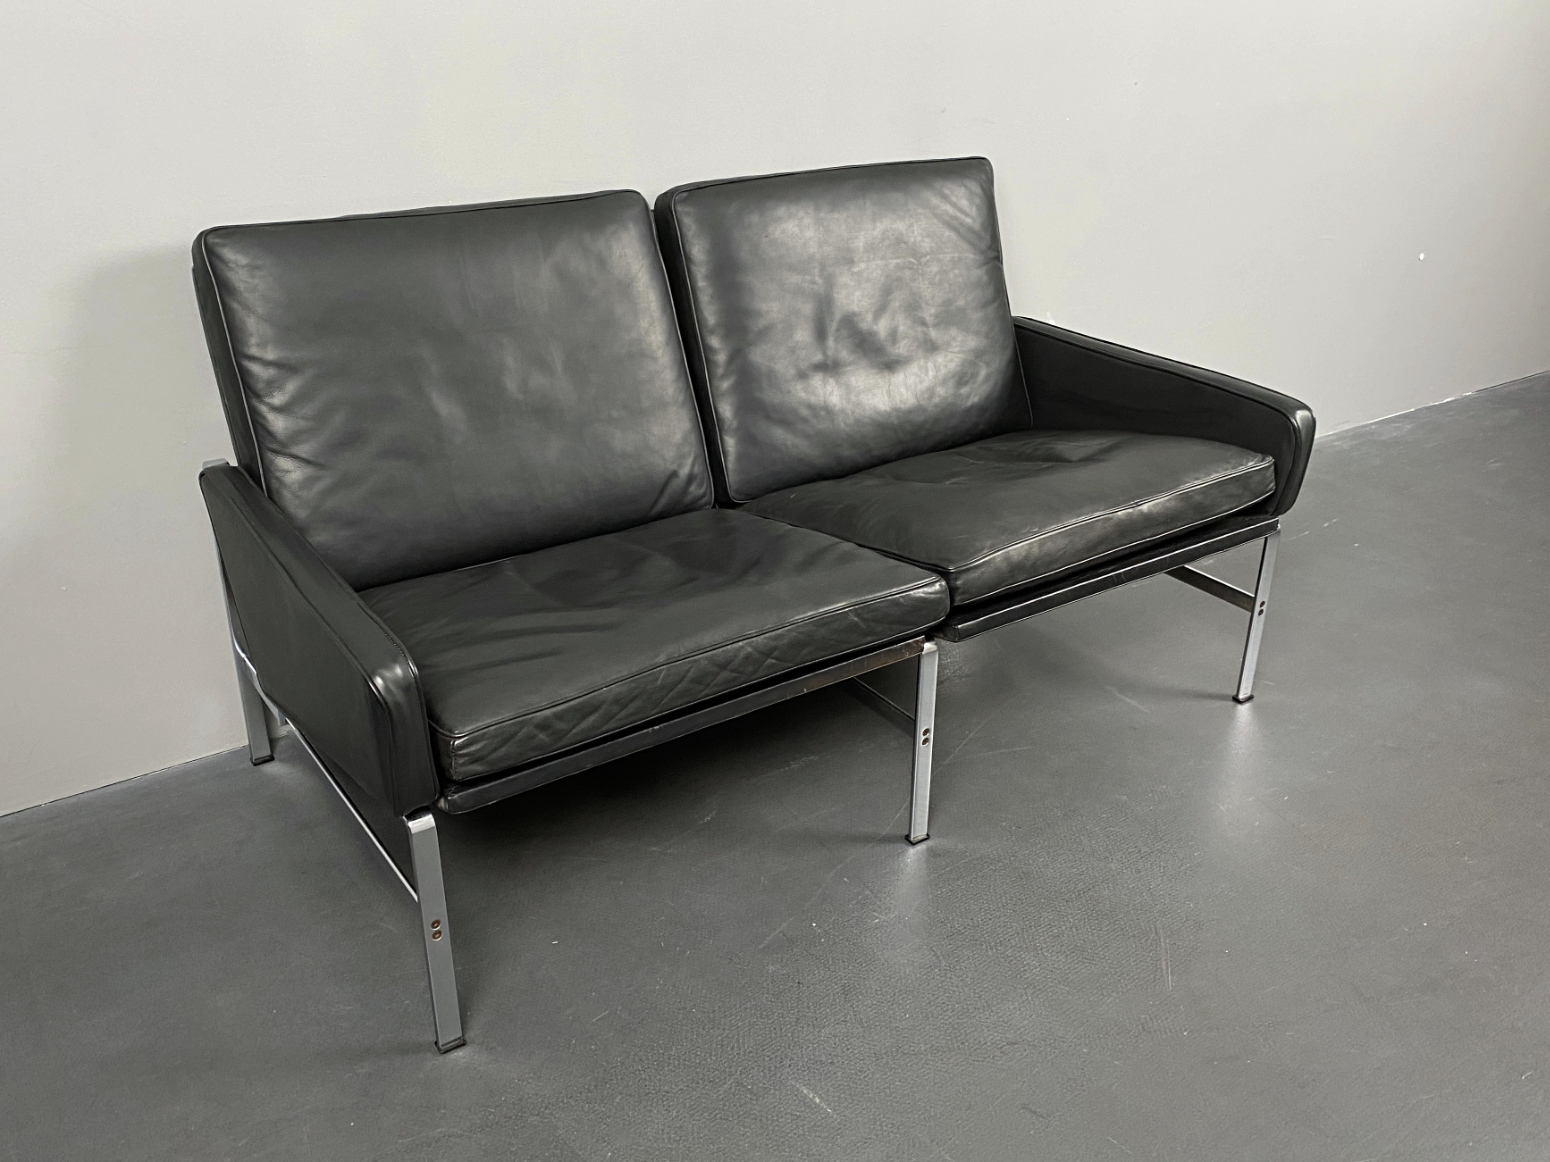 2-Seater Sofa / Couch, Model FK 6722, black Leather by Preben Fabricius & Jørgen Kastholm for Kill International, Germany, 1960s